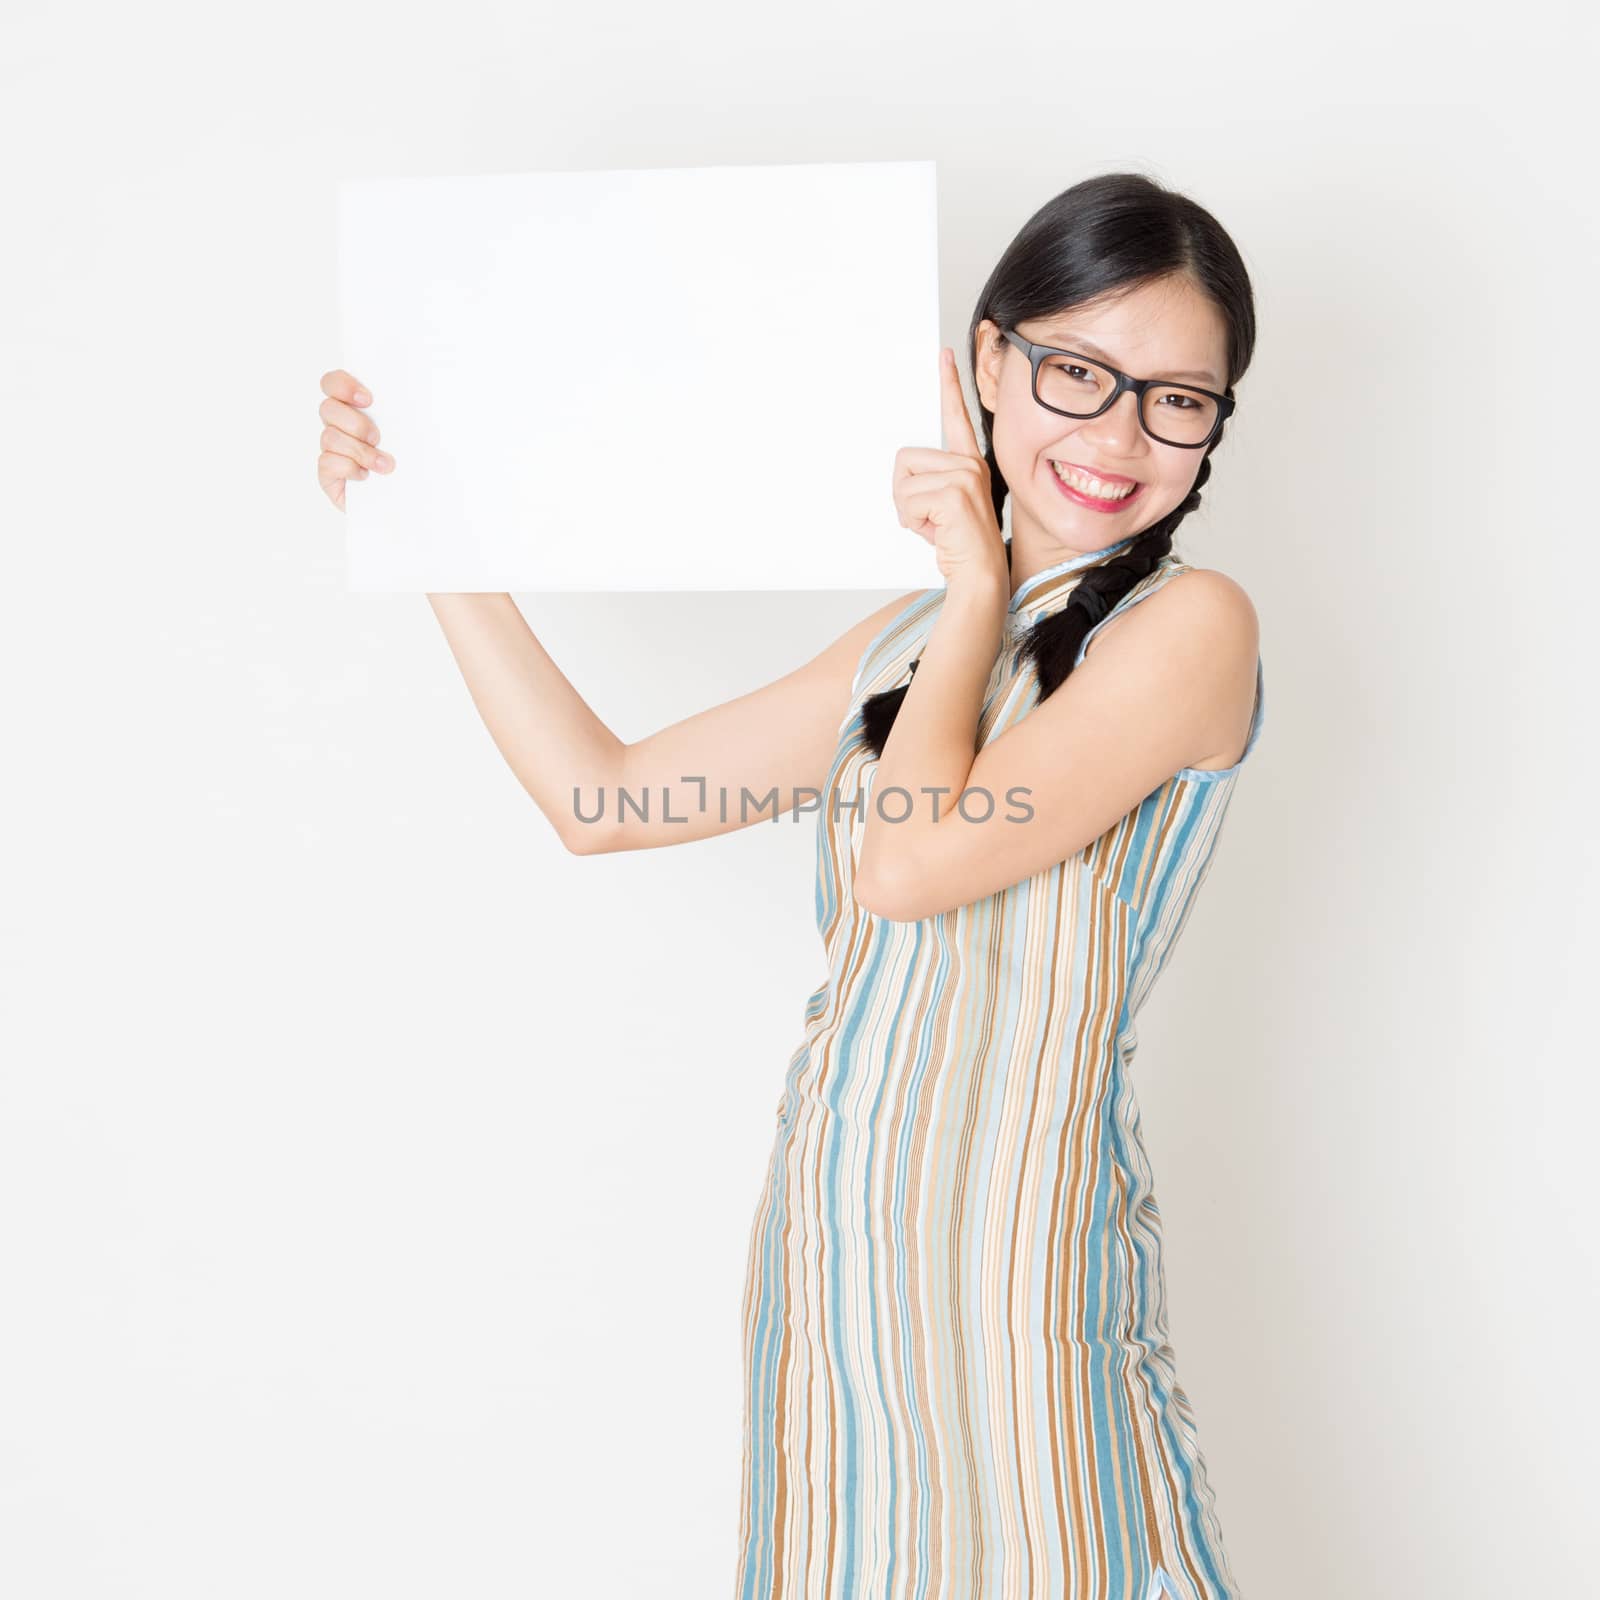 Portrait of young Asian girl in traditional qipao dress hand holding white blank paper card, celebrating Chinese Lunar New Year or spring festival, standing on plain background.